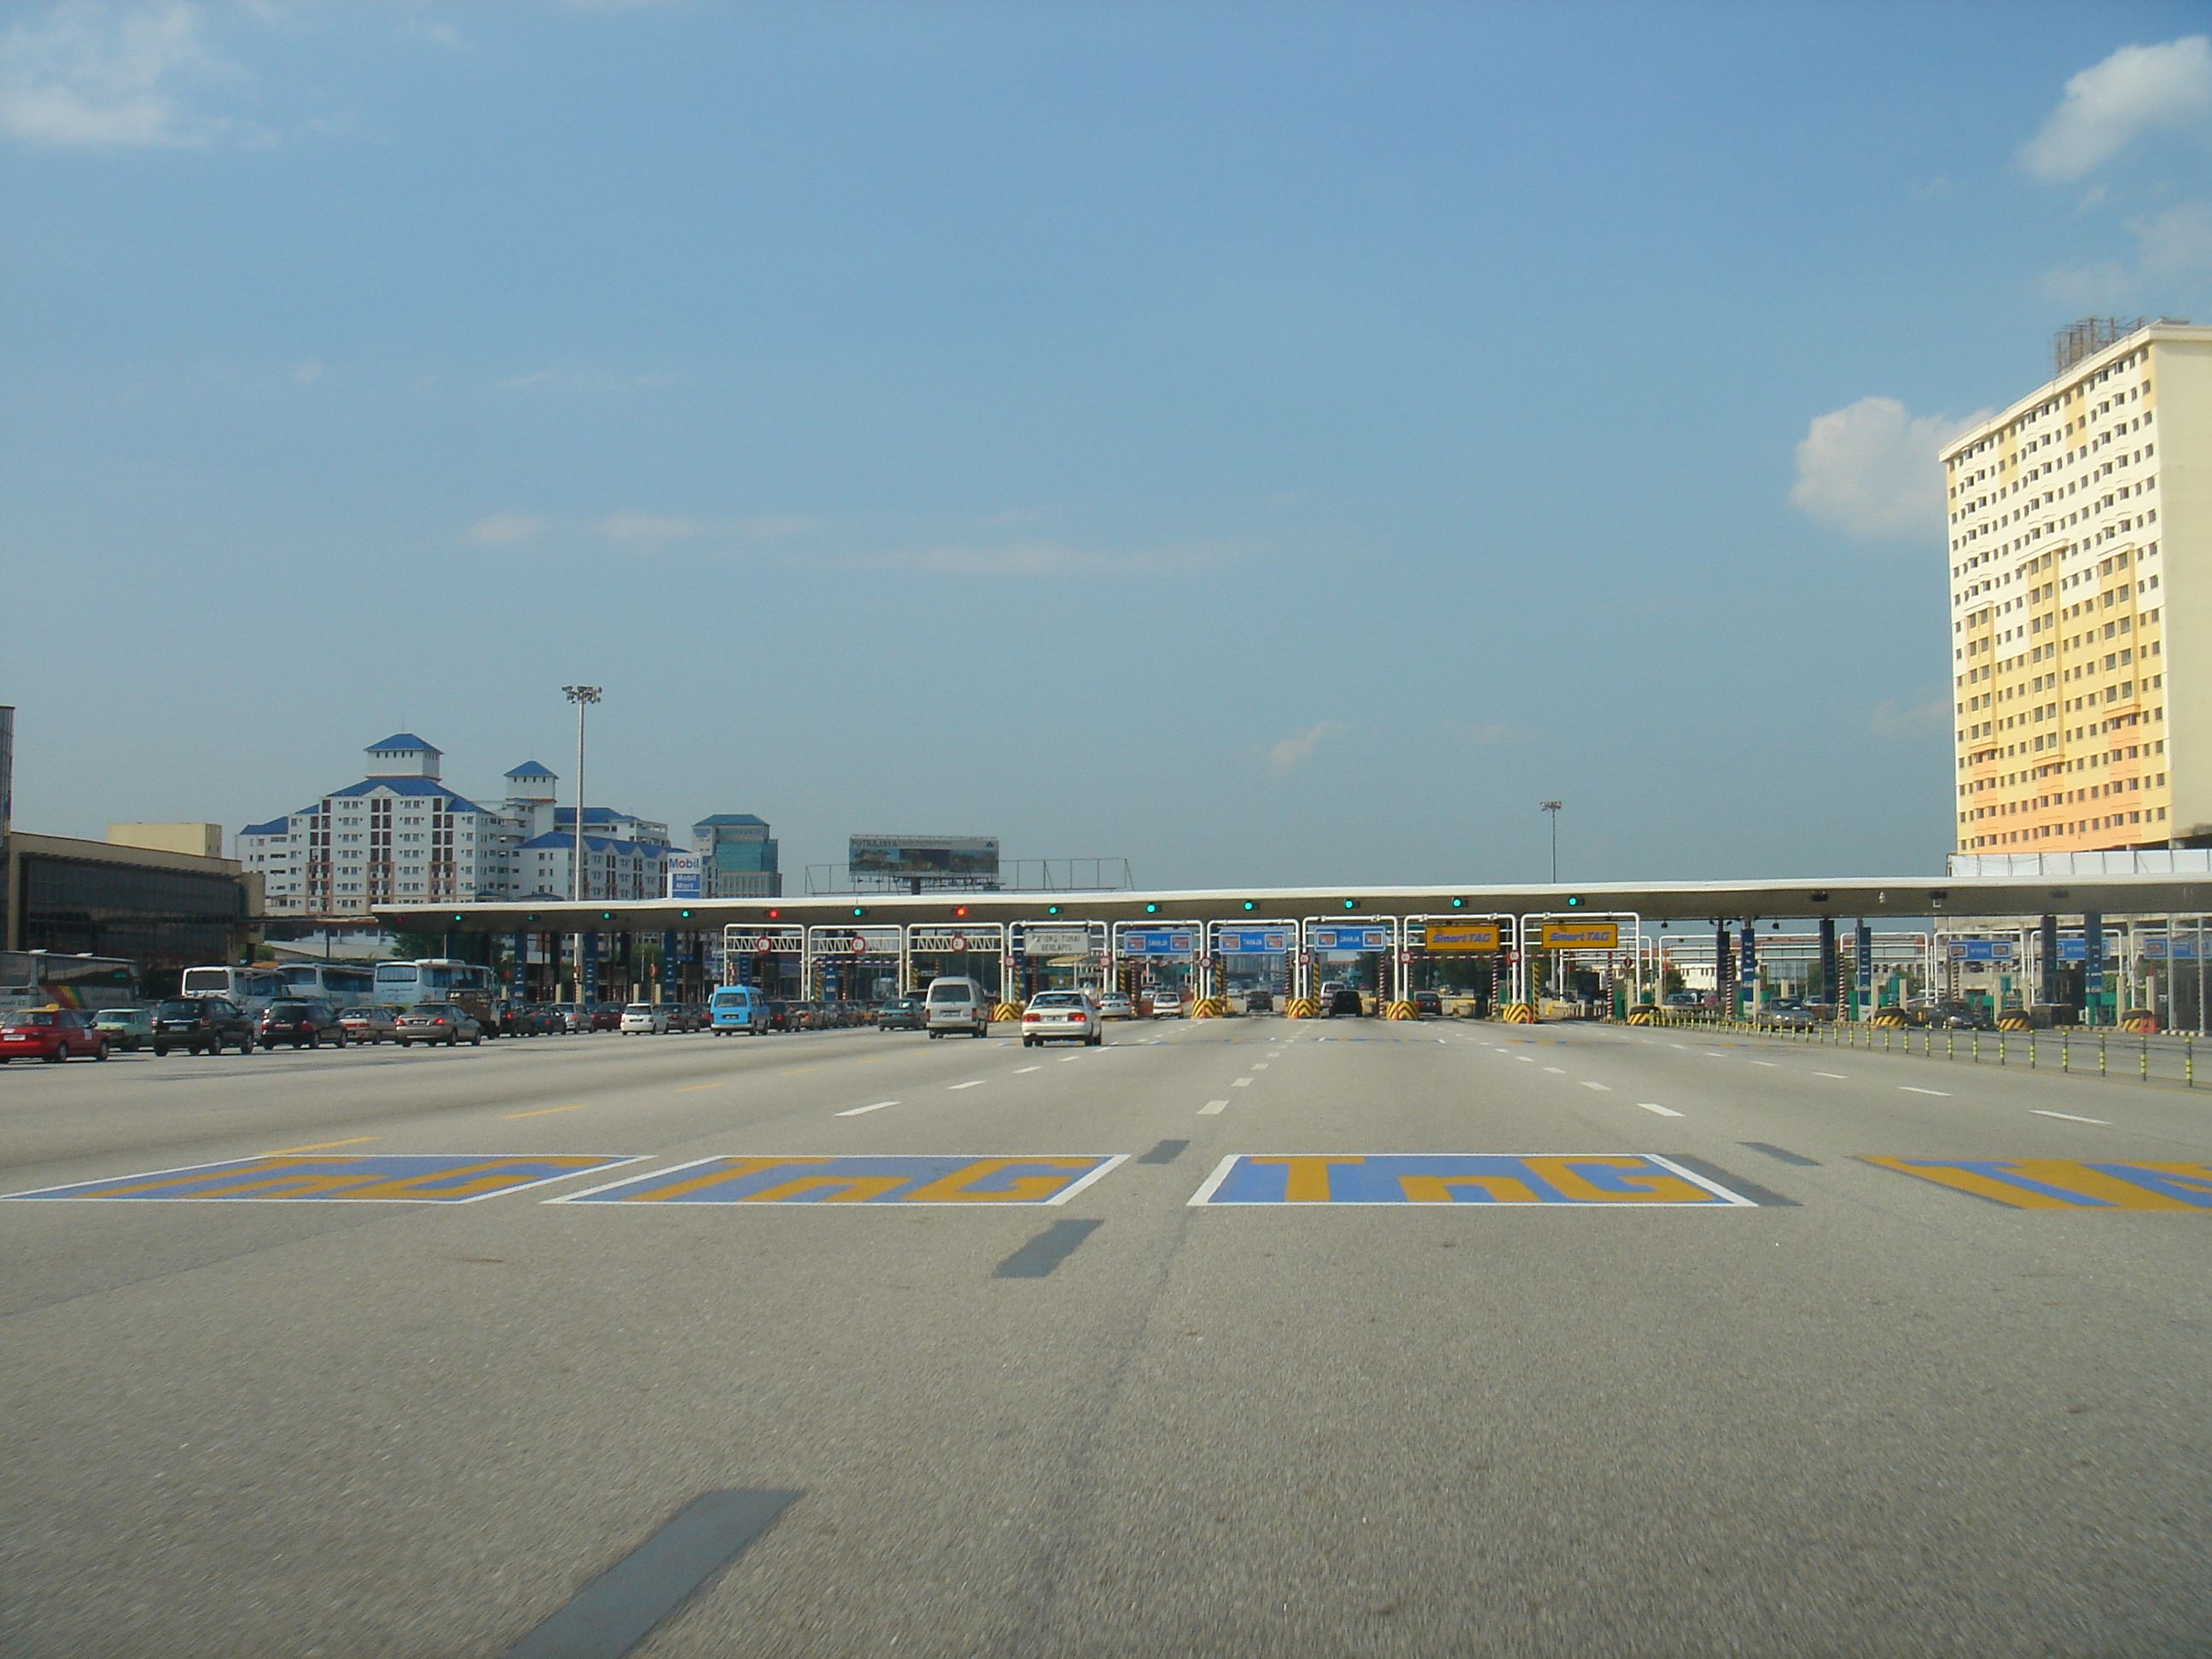 Plus Highways toll rates due for hike in 2016